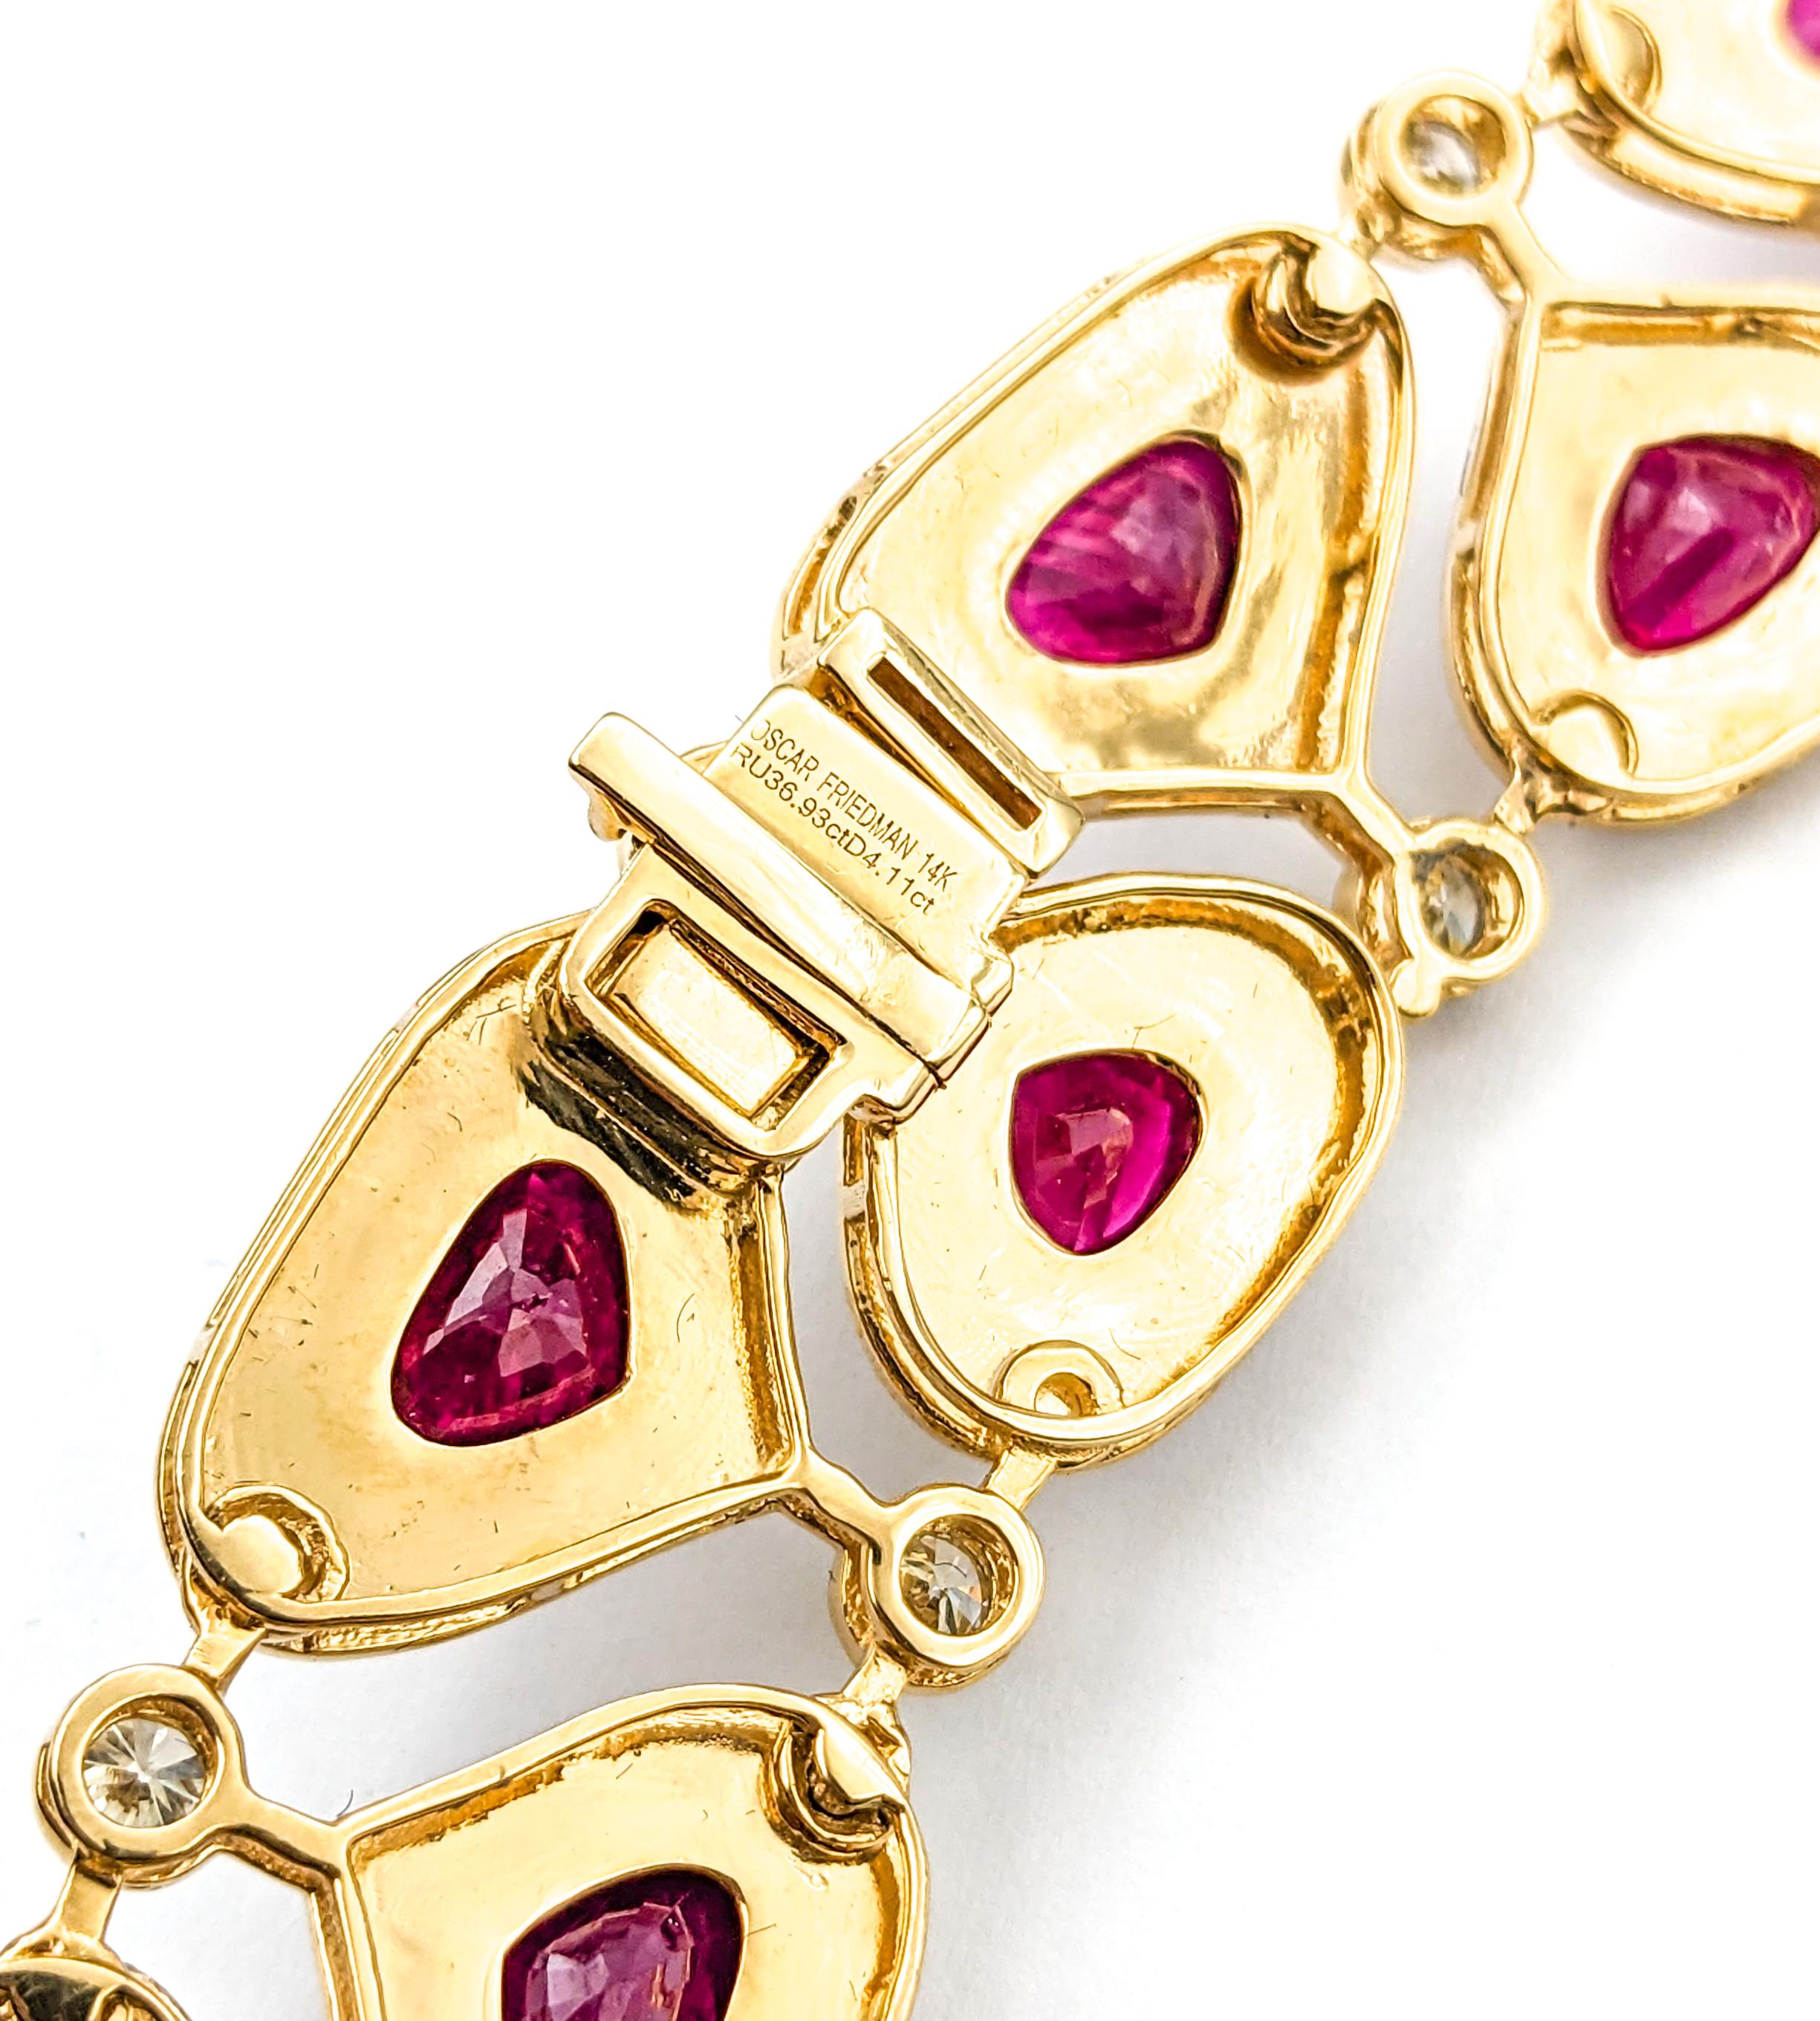 36.93ctw Hand White Enameled Burmese Rubies & 4.11ctw Diamonds Necklace In Yellow Gold

Introducing an exquisite Burmese Ruby Necklace, masterfully crafted in 14k yellow gold. This luxurious necklace showcases 4.11ctw of glittering round diamonds